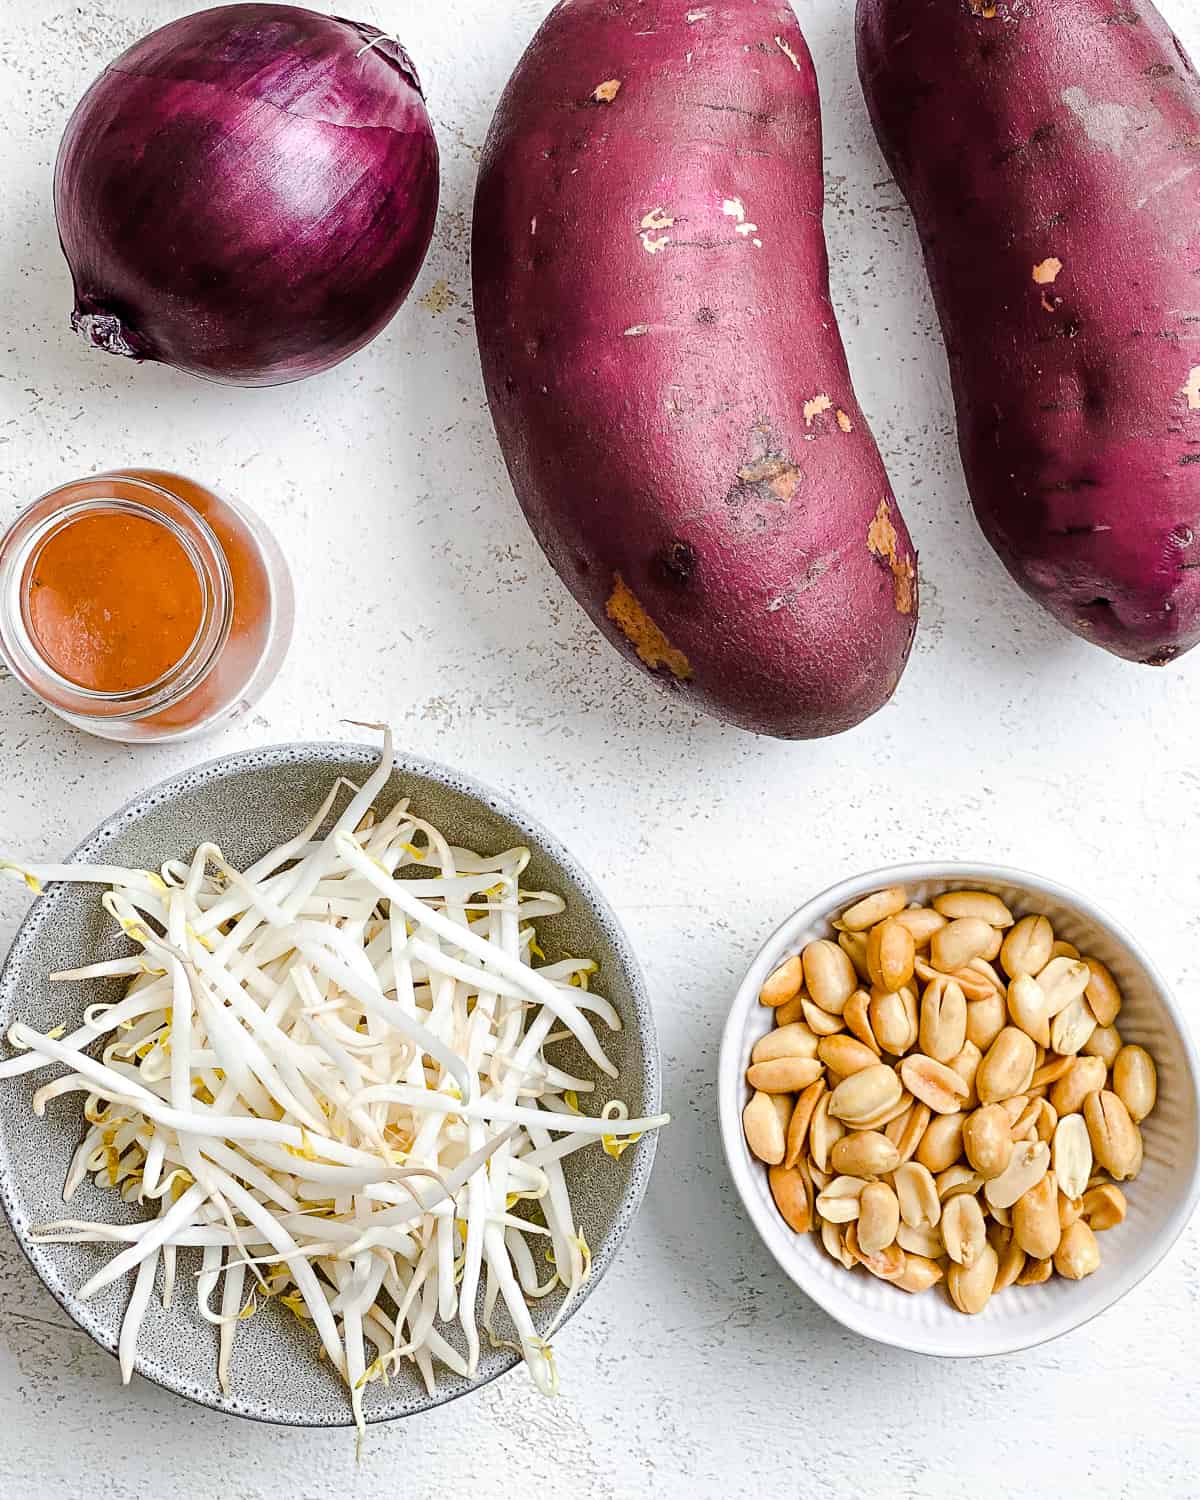 ingredients for Sweet Potato Bites with BBQ Mung Bean Sprouts measured out a،nst a white surface